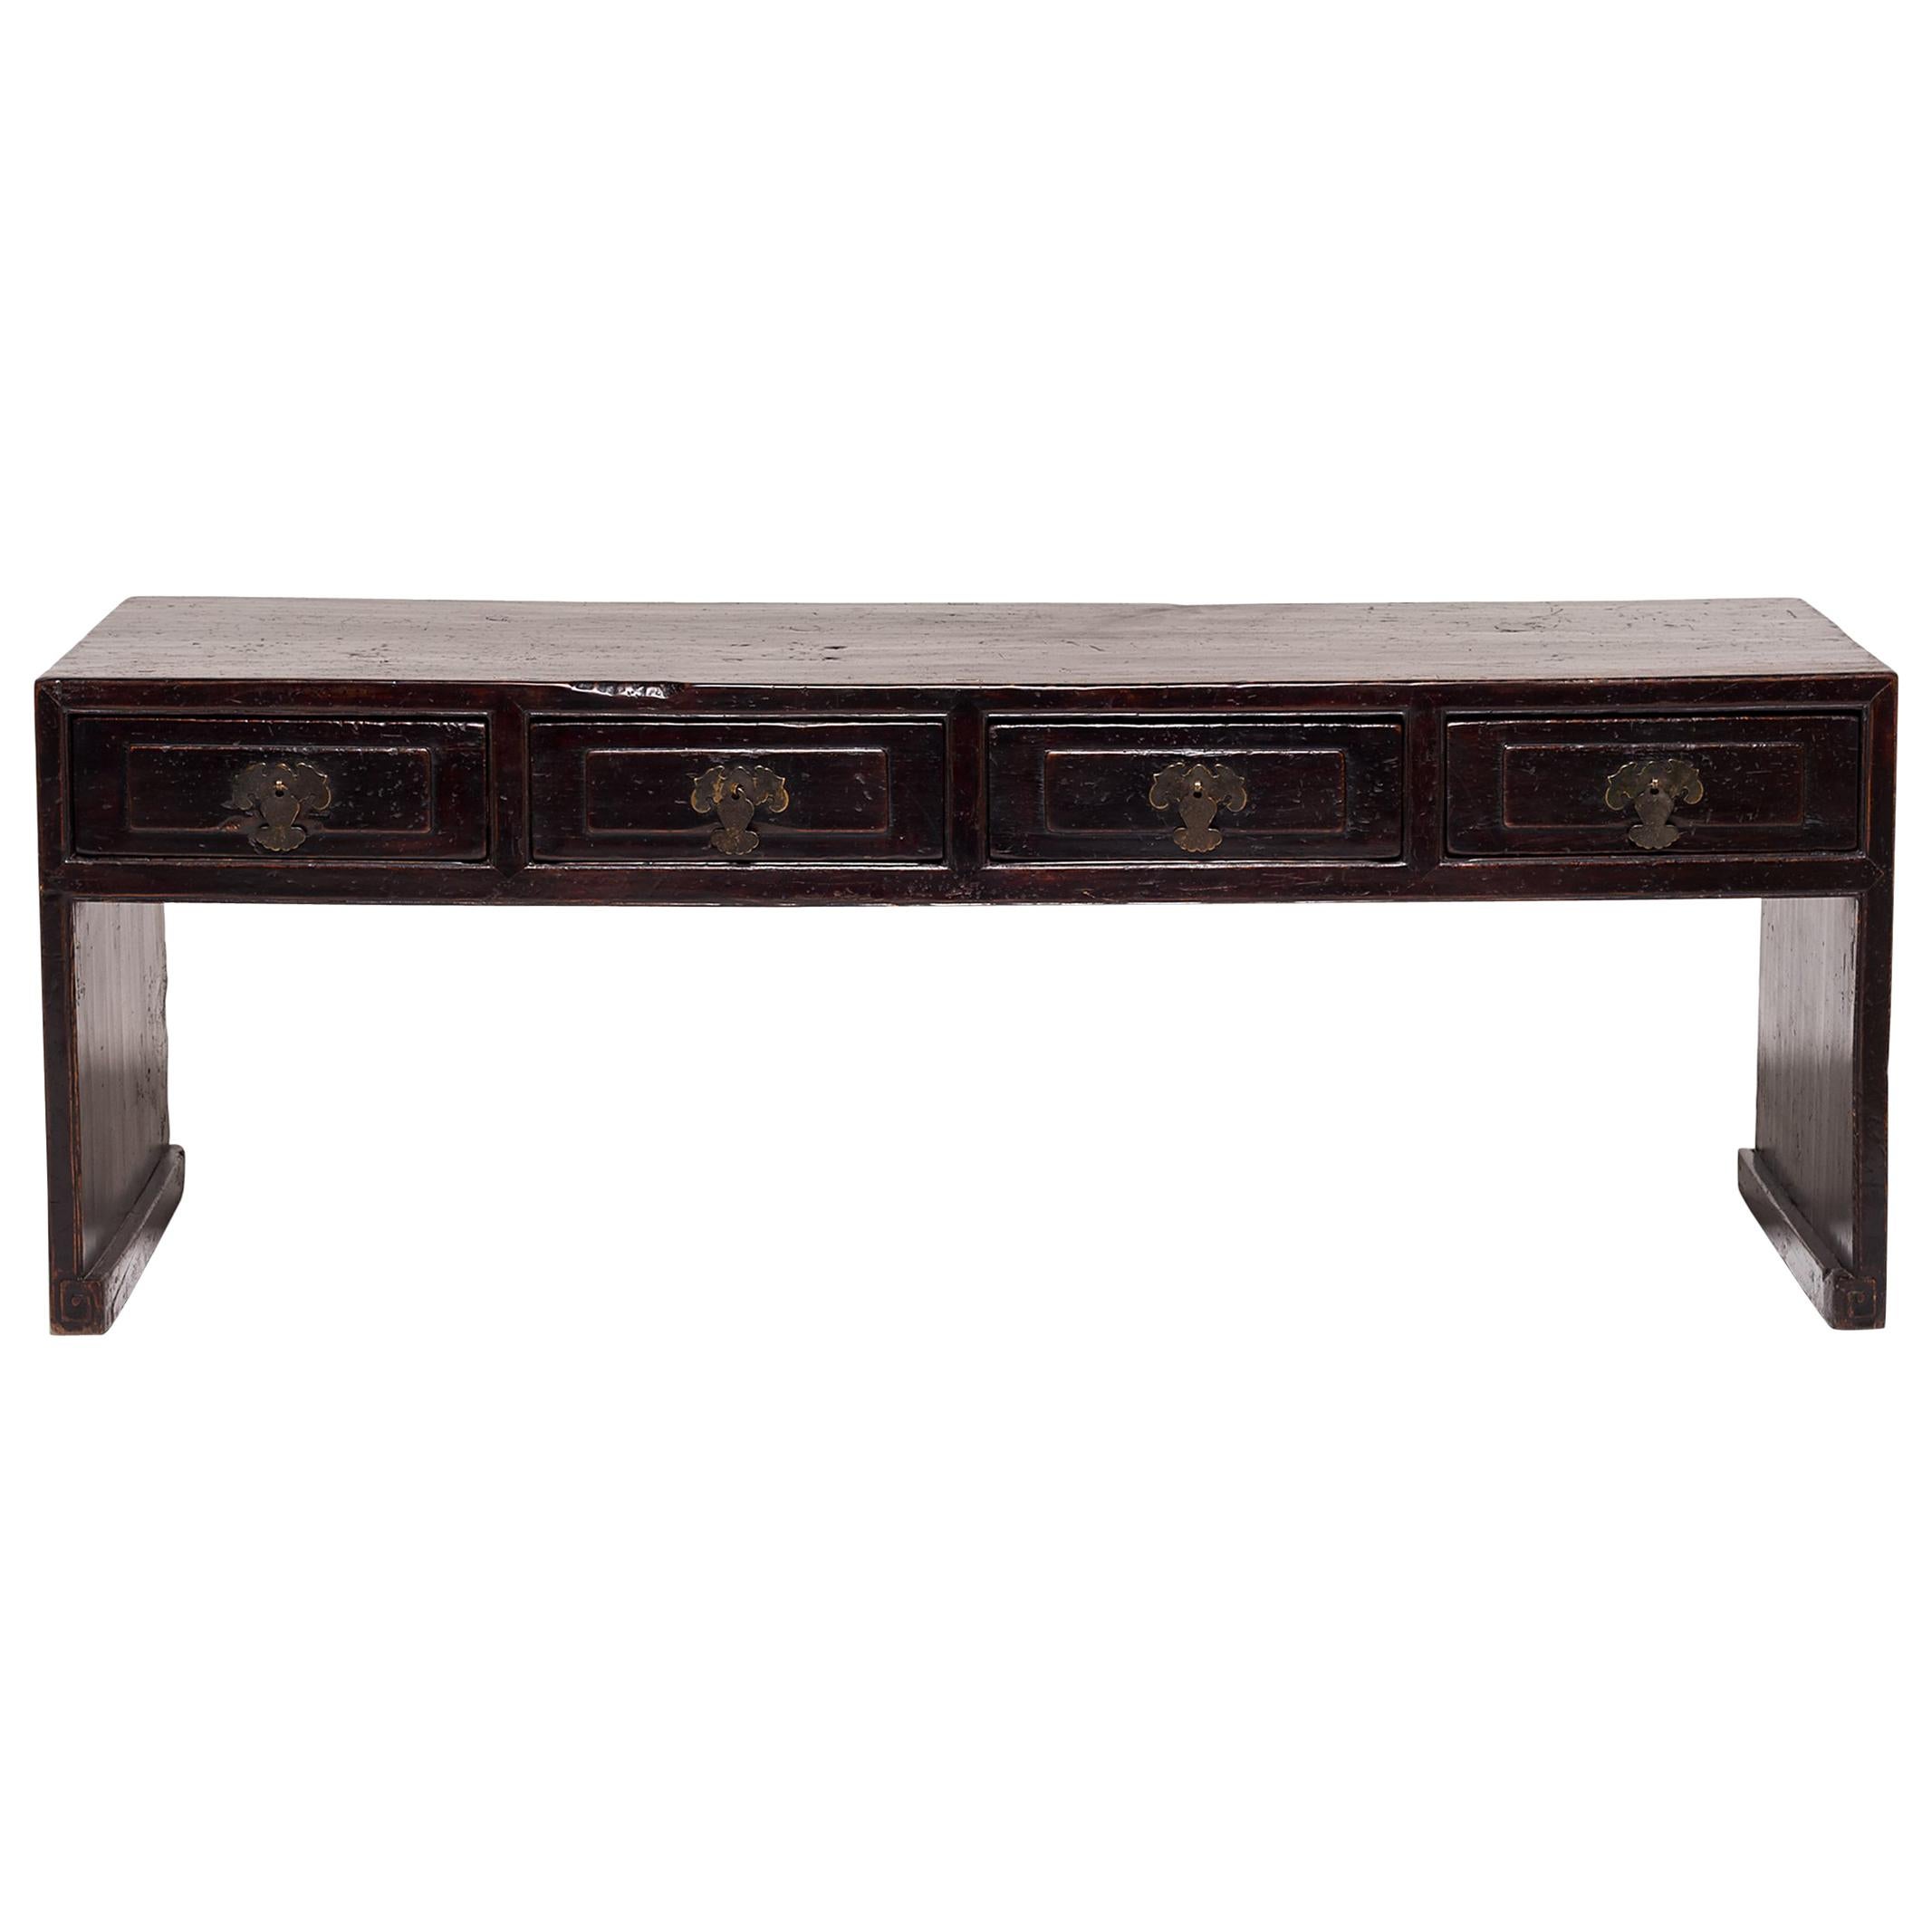 Early 20th Century Chinese Four-Drawer Low Ribbon Table